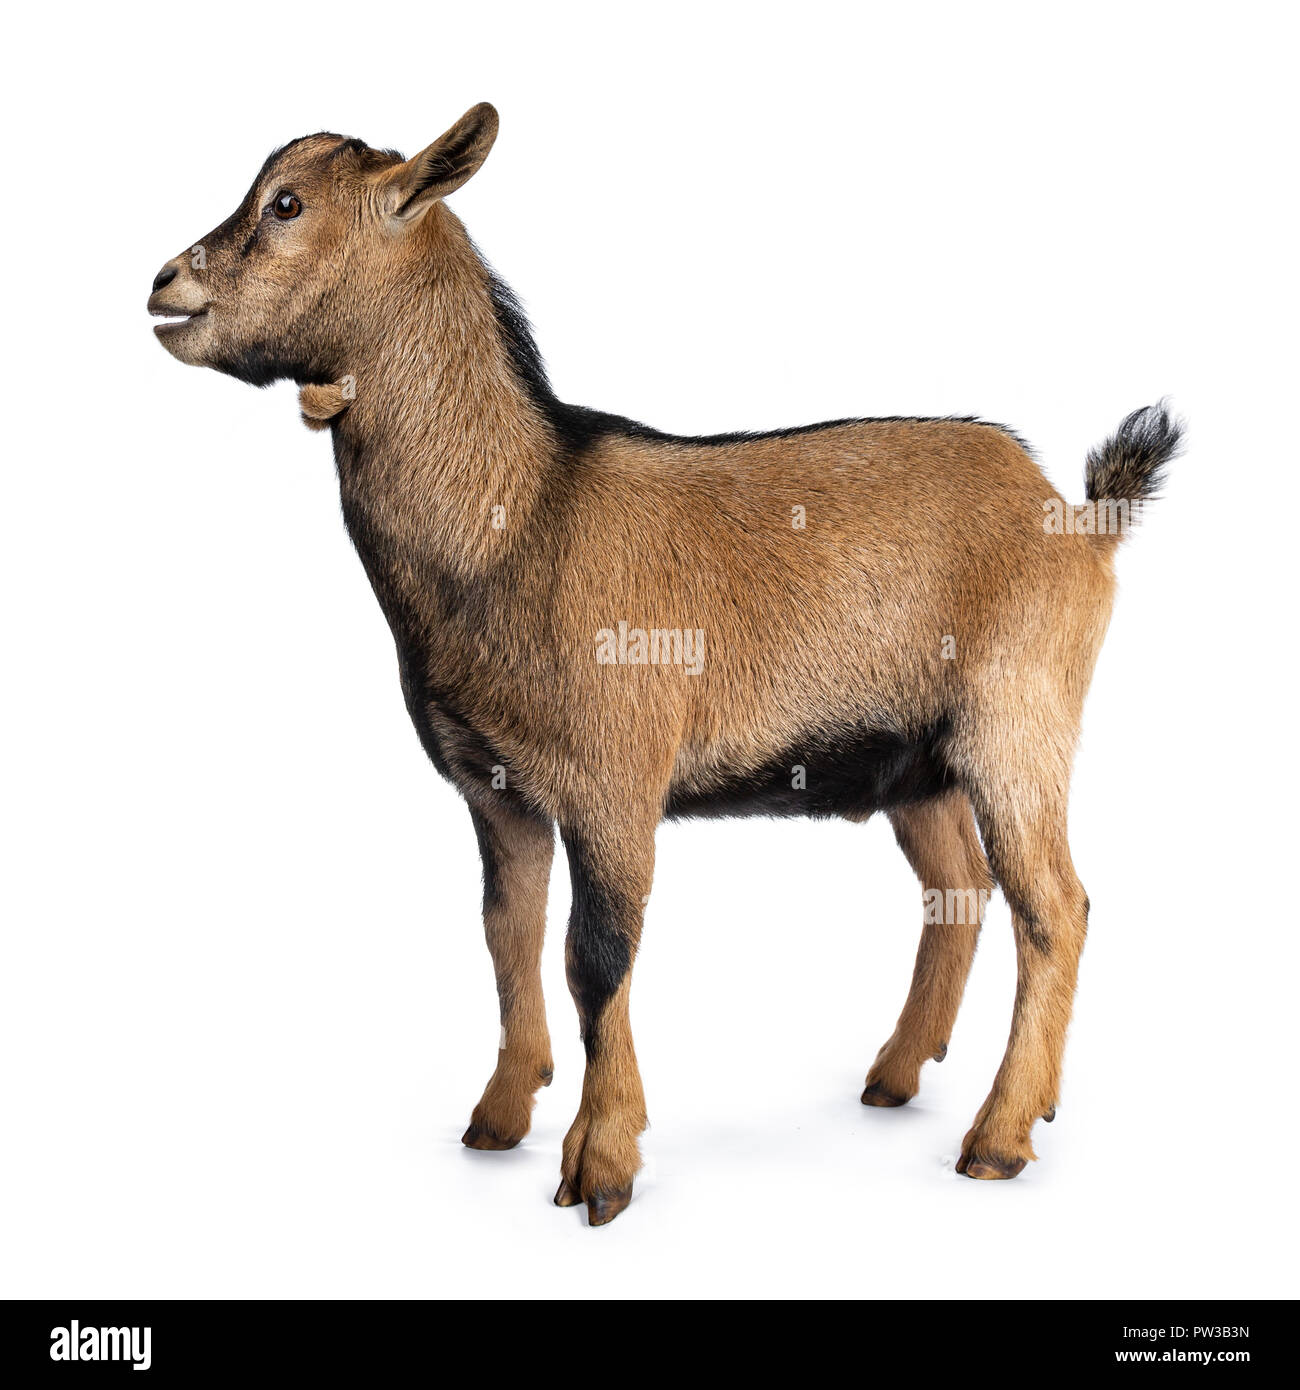 Brown agouti pygmy goat standing side way looking forwards with open mouth, isolated on white background Stock Photo